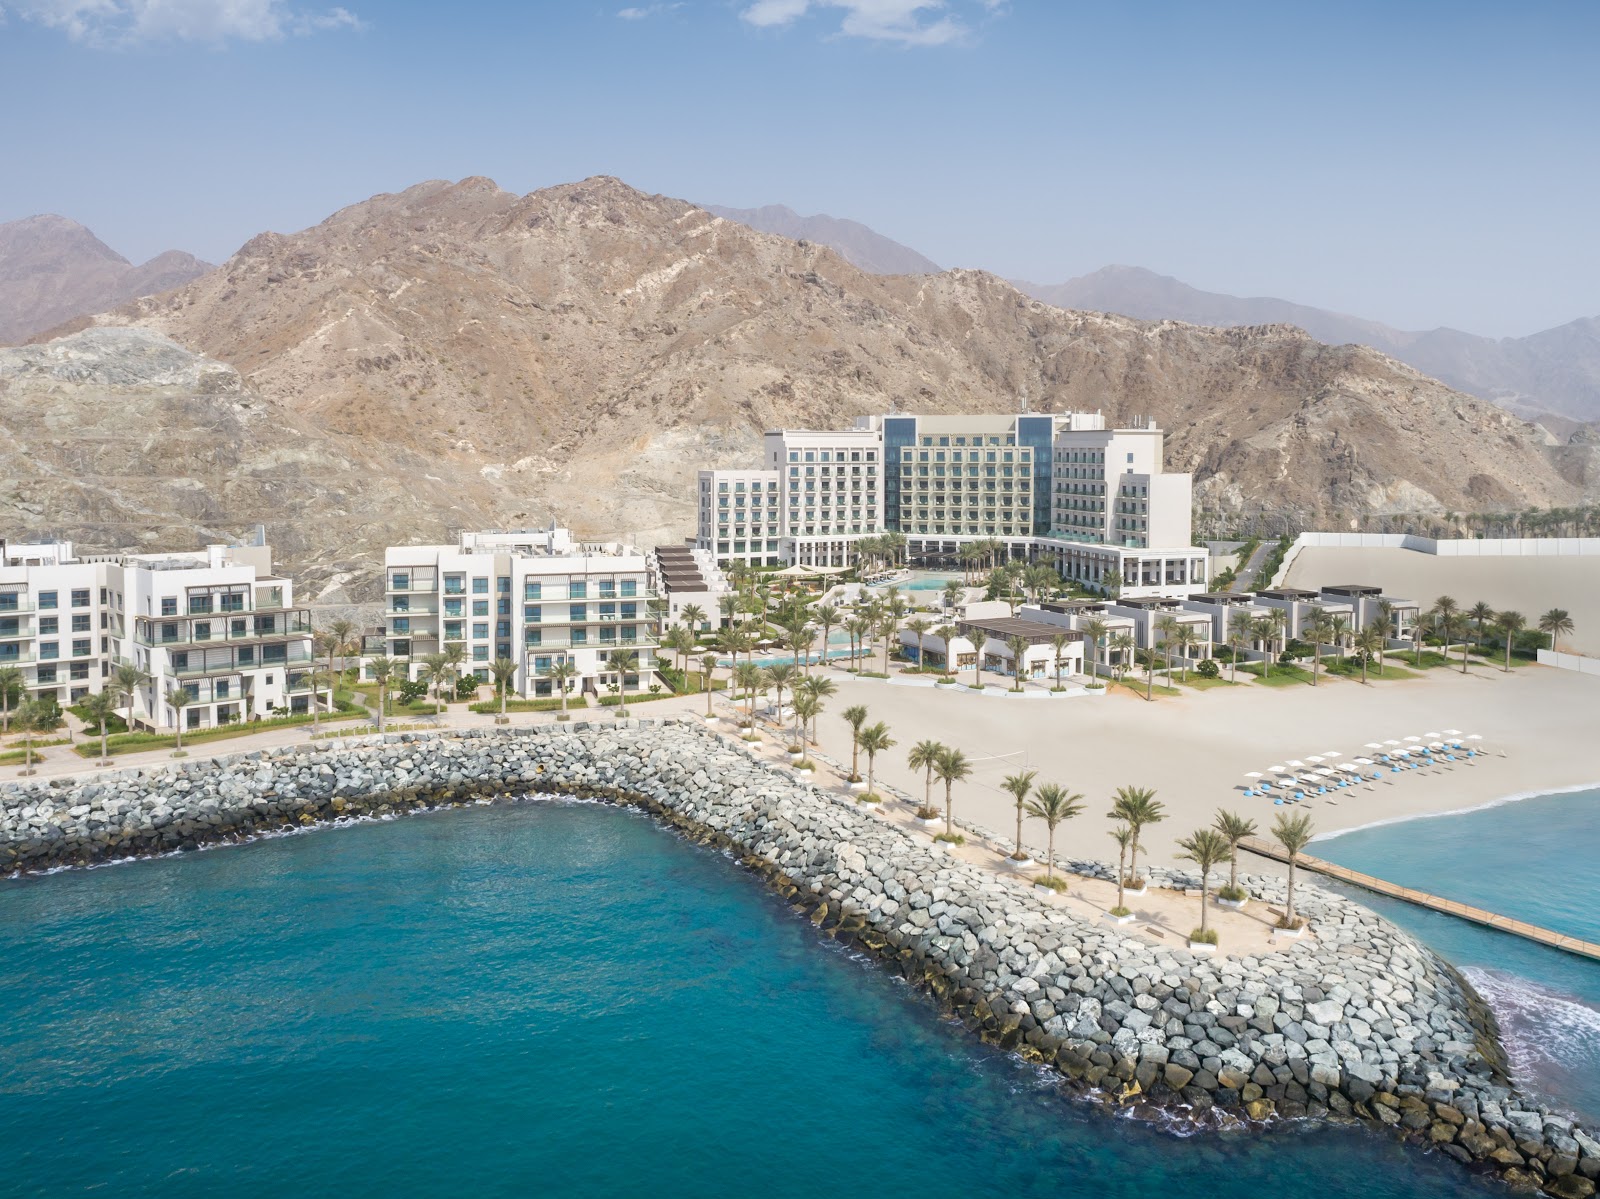 Photo of Fujairah Beach Resort with very clean level of cleanliness